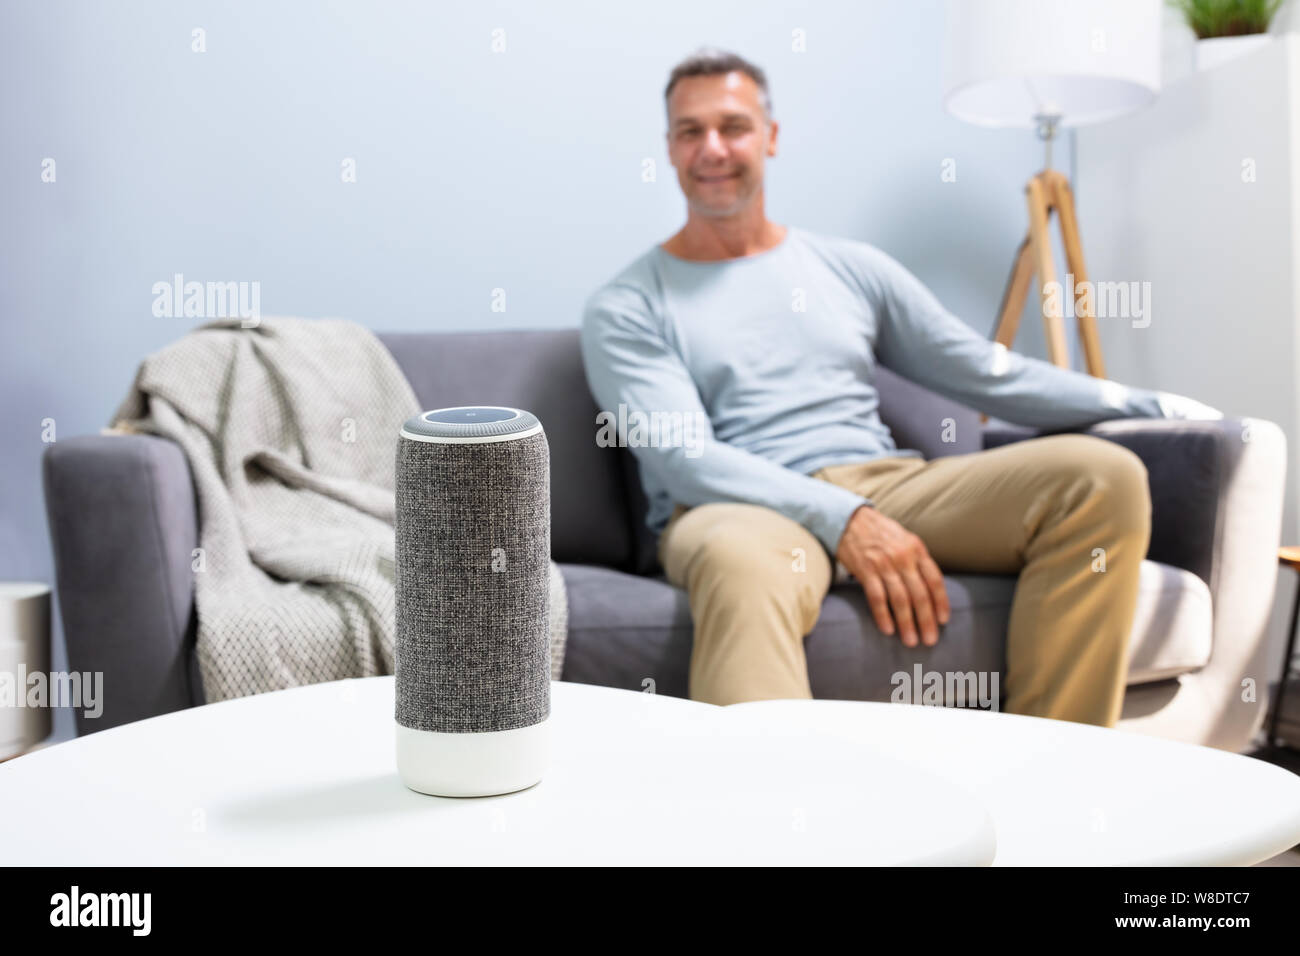 Close-up Of Wireless Speaker In Front Of Man Sitting On Sofa Stock Photo